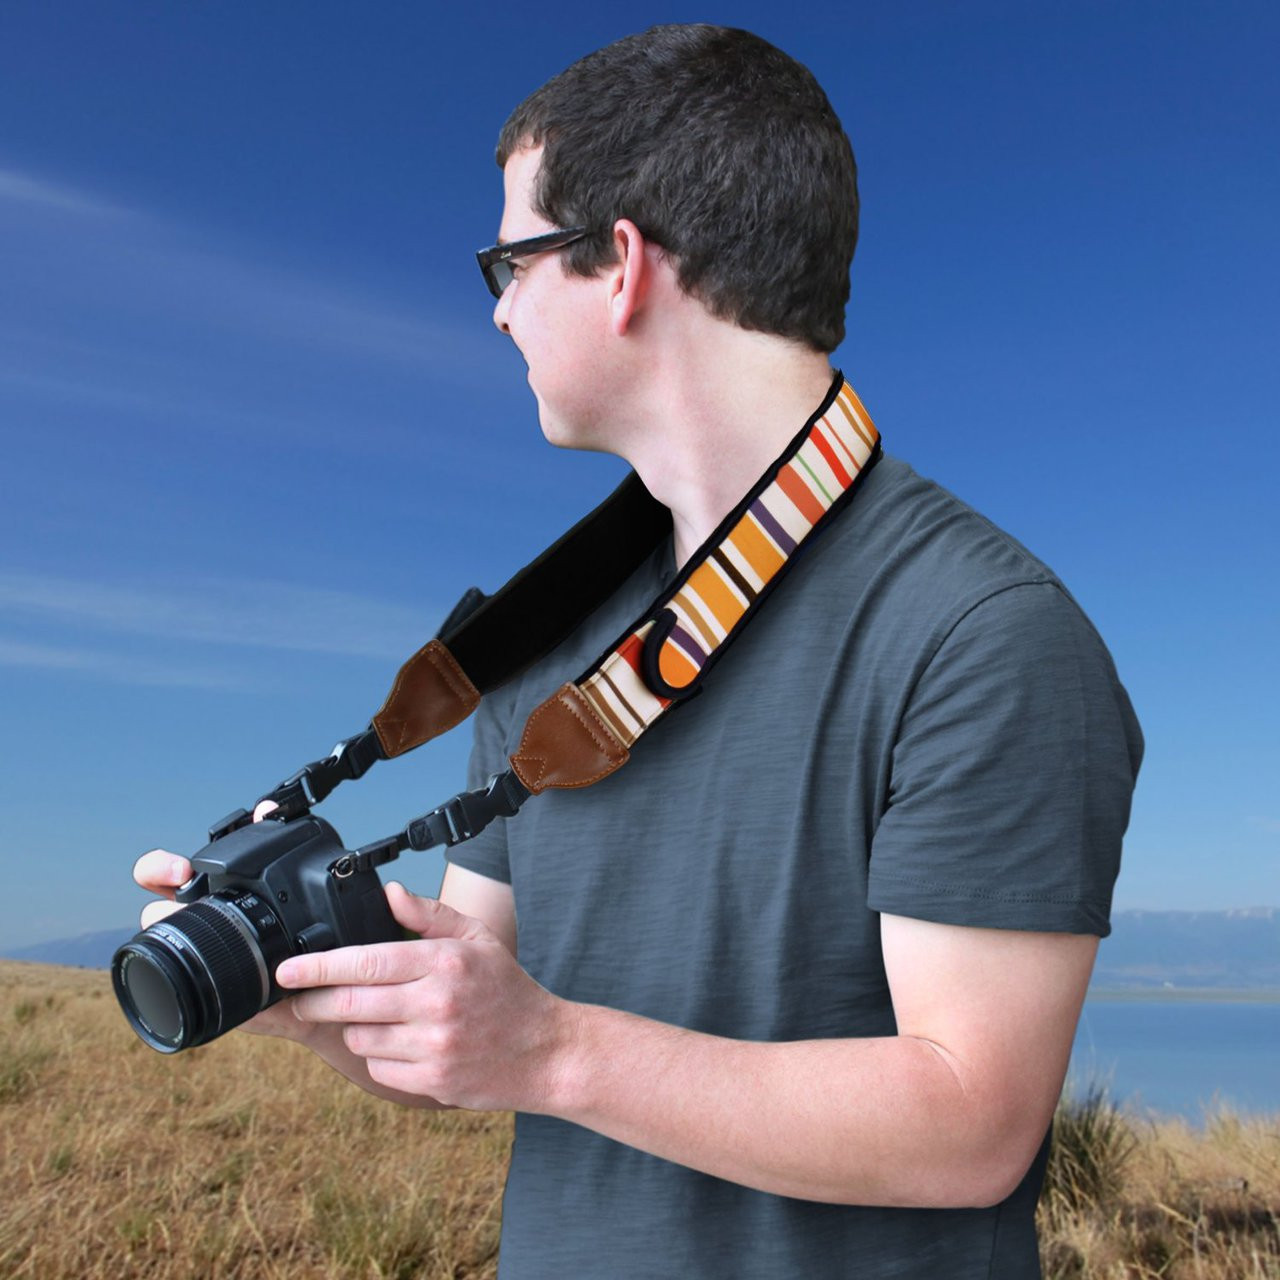 USA GEAR TrueSHOT Neck Strap Neoprene Camera Straps - Padded Camera Strap,  Pockets, and Quick Release Buckles - Compatible with Canon, Nikon, Sony and